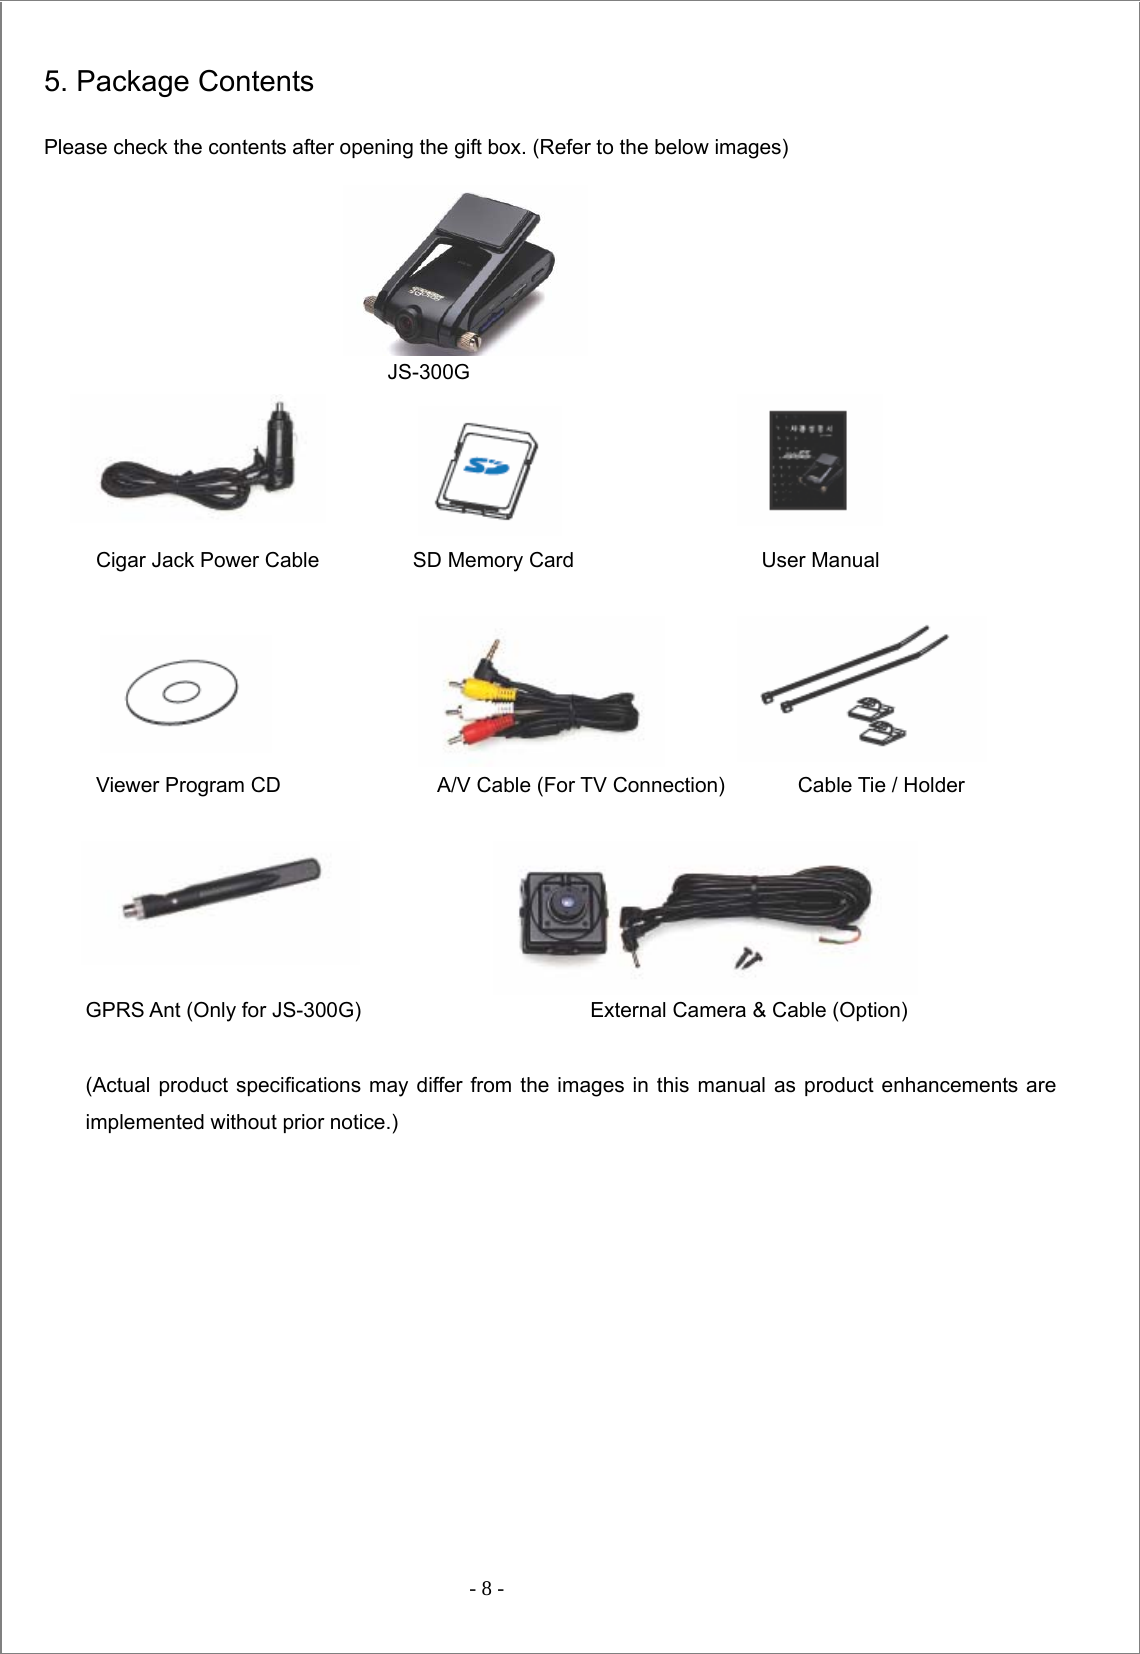  - 8 -  5. Package Contents Please check the contents after opening the gift box. (Refer to the below images)                                   JS-300G        Cigar Jack Power Cable         SD Memory Card                  User Manual             Viewer Program CD               A/V Cable (For TV Connection)       Cable Tie / Holder      GPRS Ant (Only for JS-300G)                      External Camera &amp; Cable (Option)  (Actual product specifications may differ from the images in this manual as product enhancements are implemented without prior notice.)            